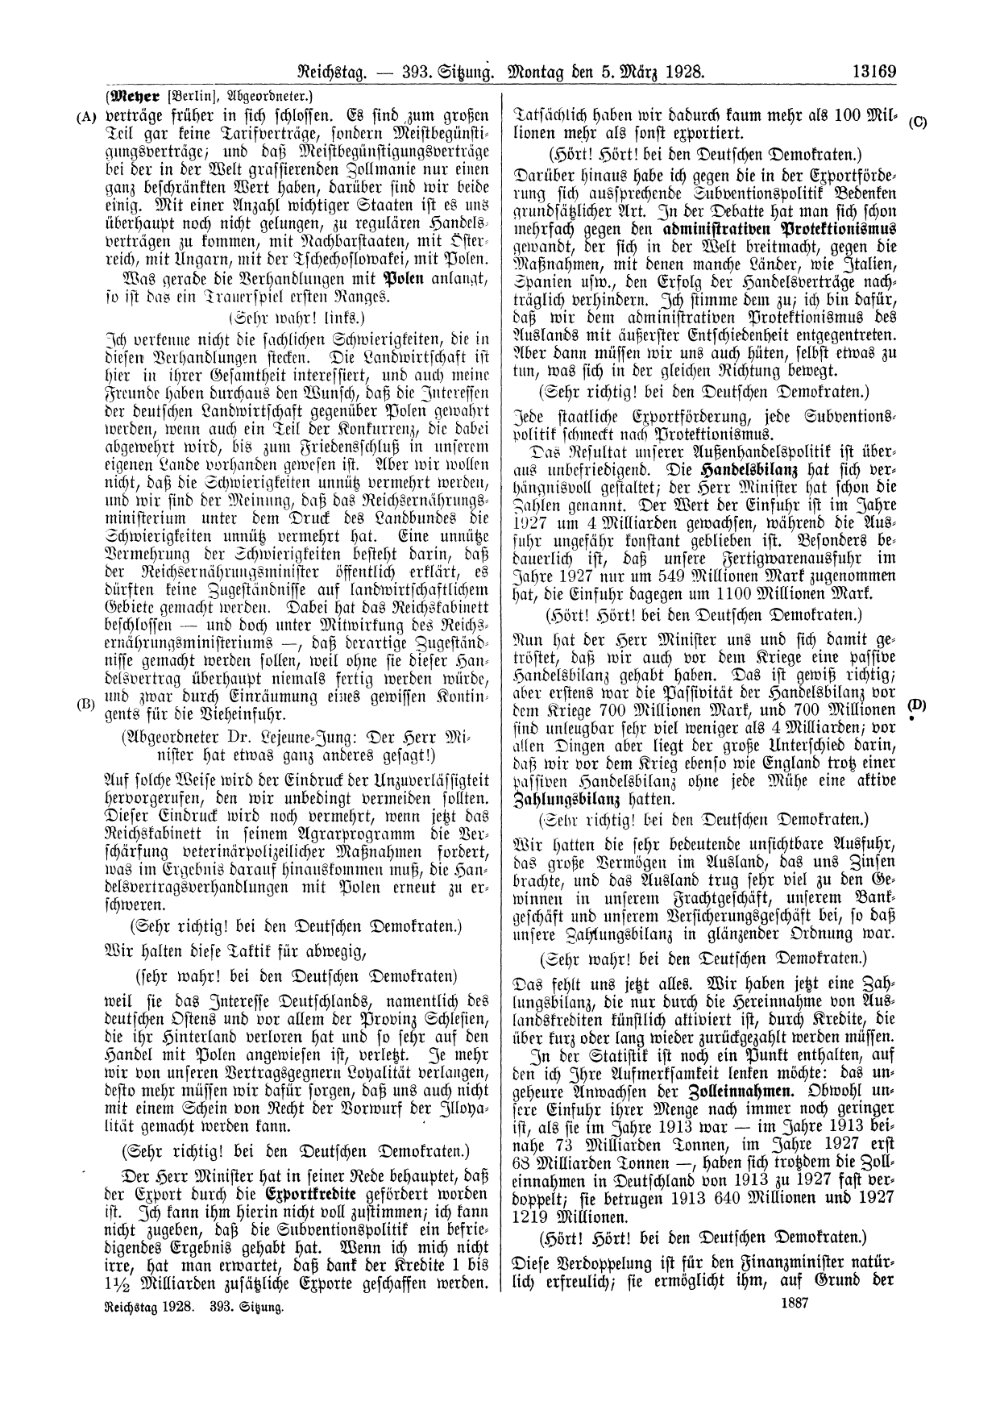 Scan of page 13169